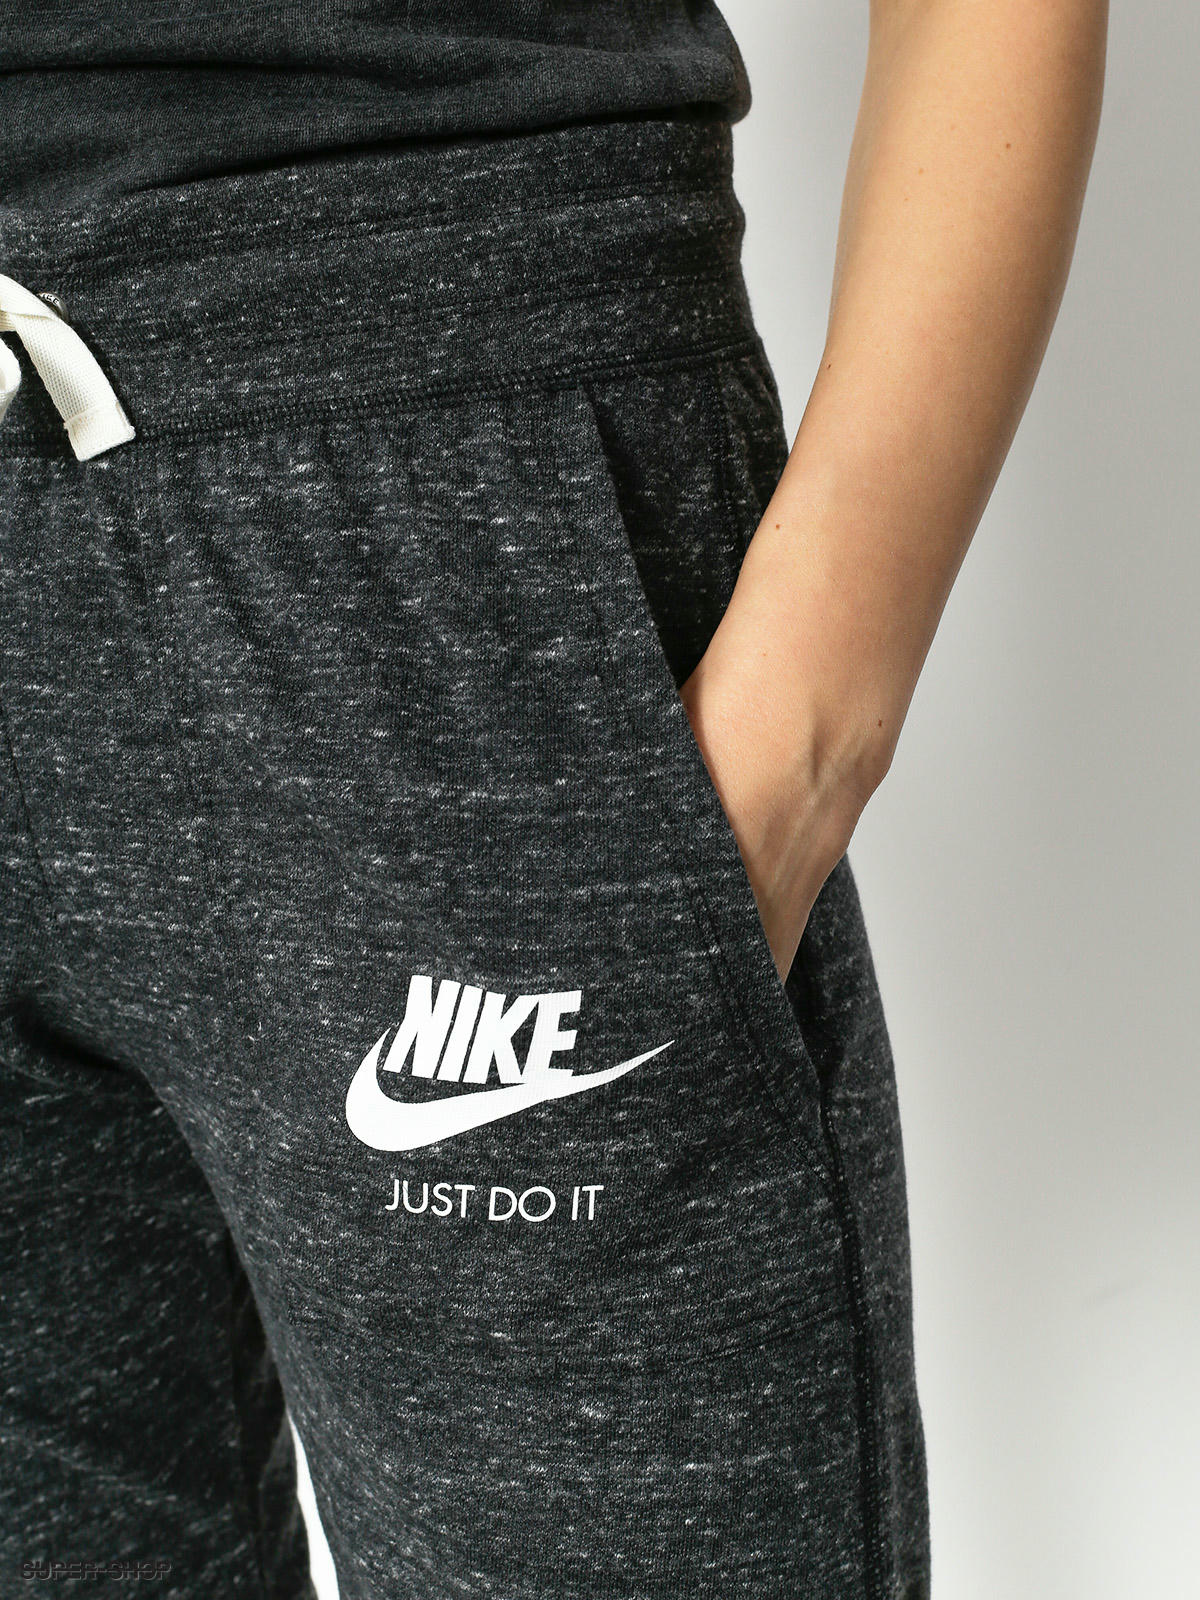 The 17 Best Workout Pants to Get You Moving